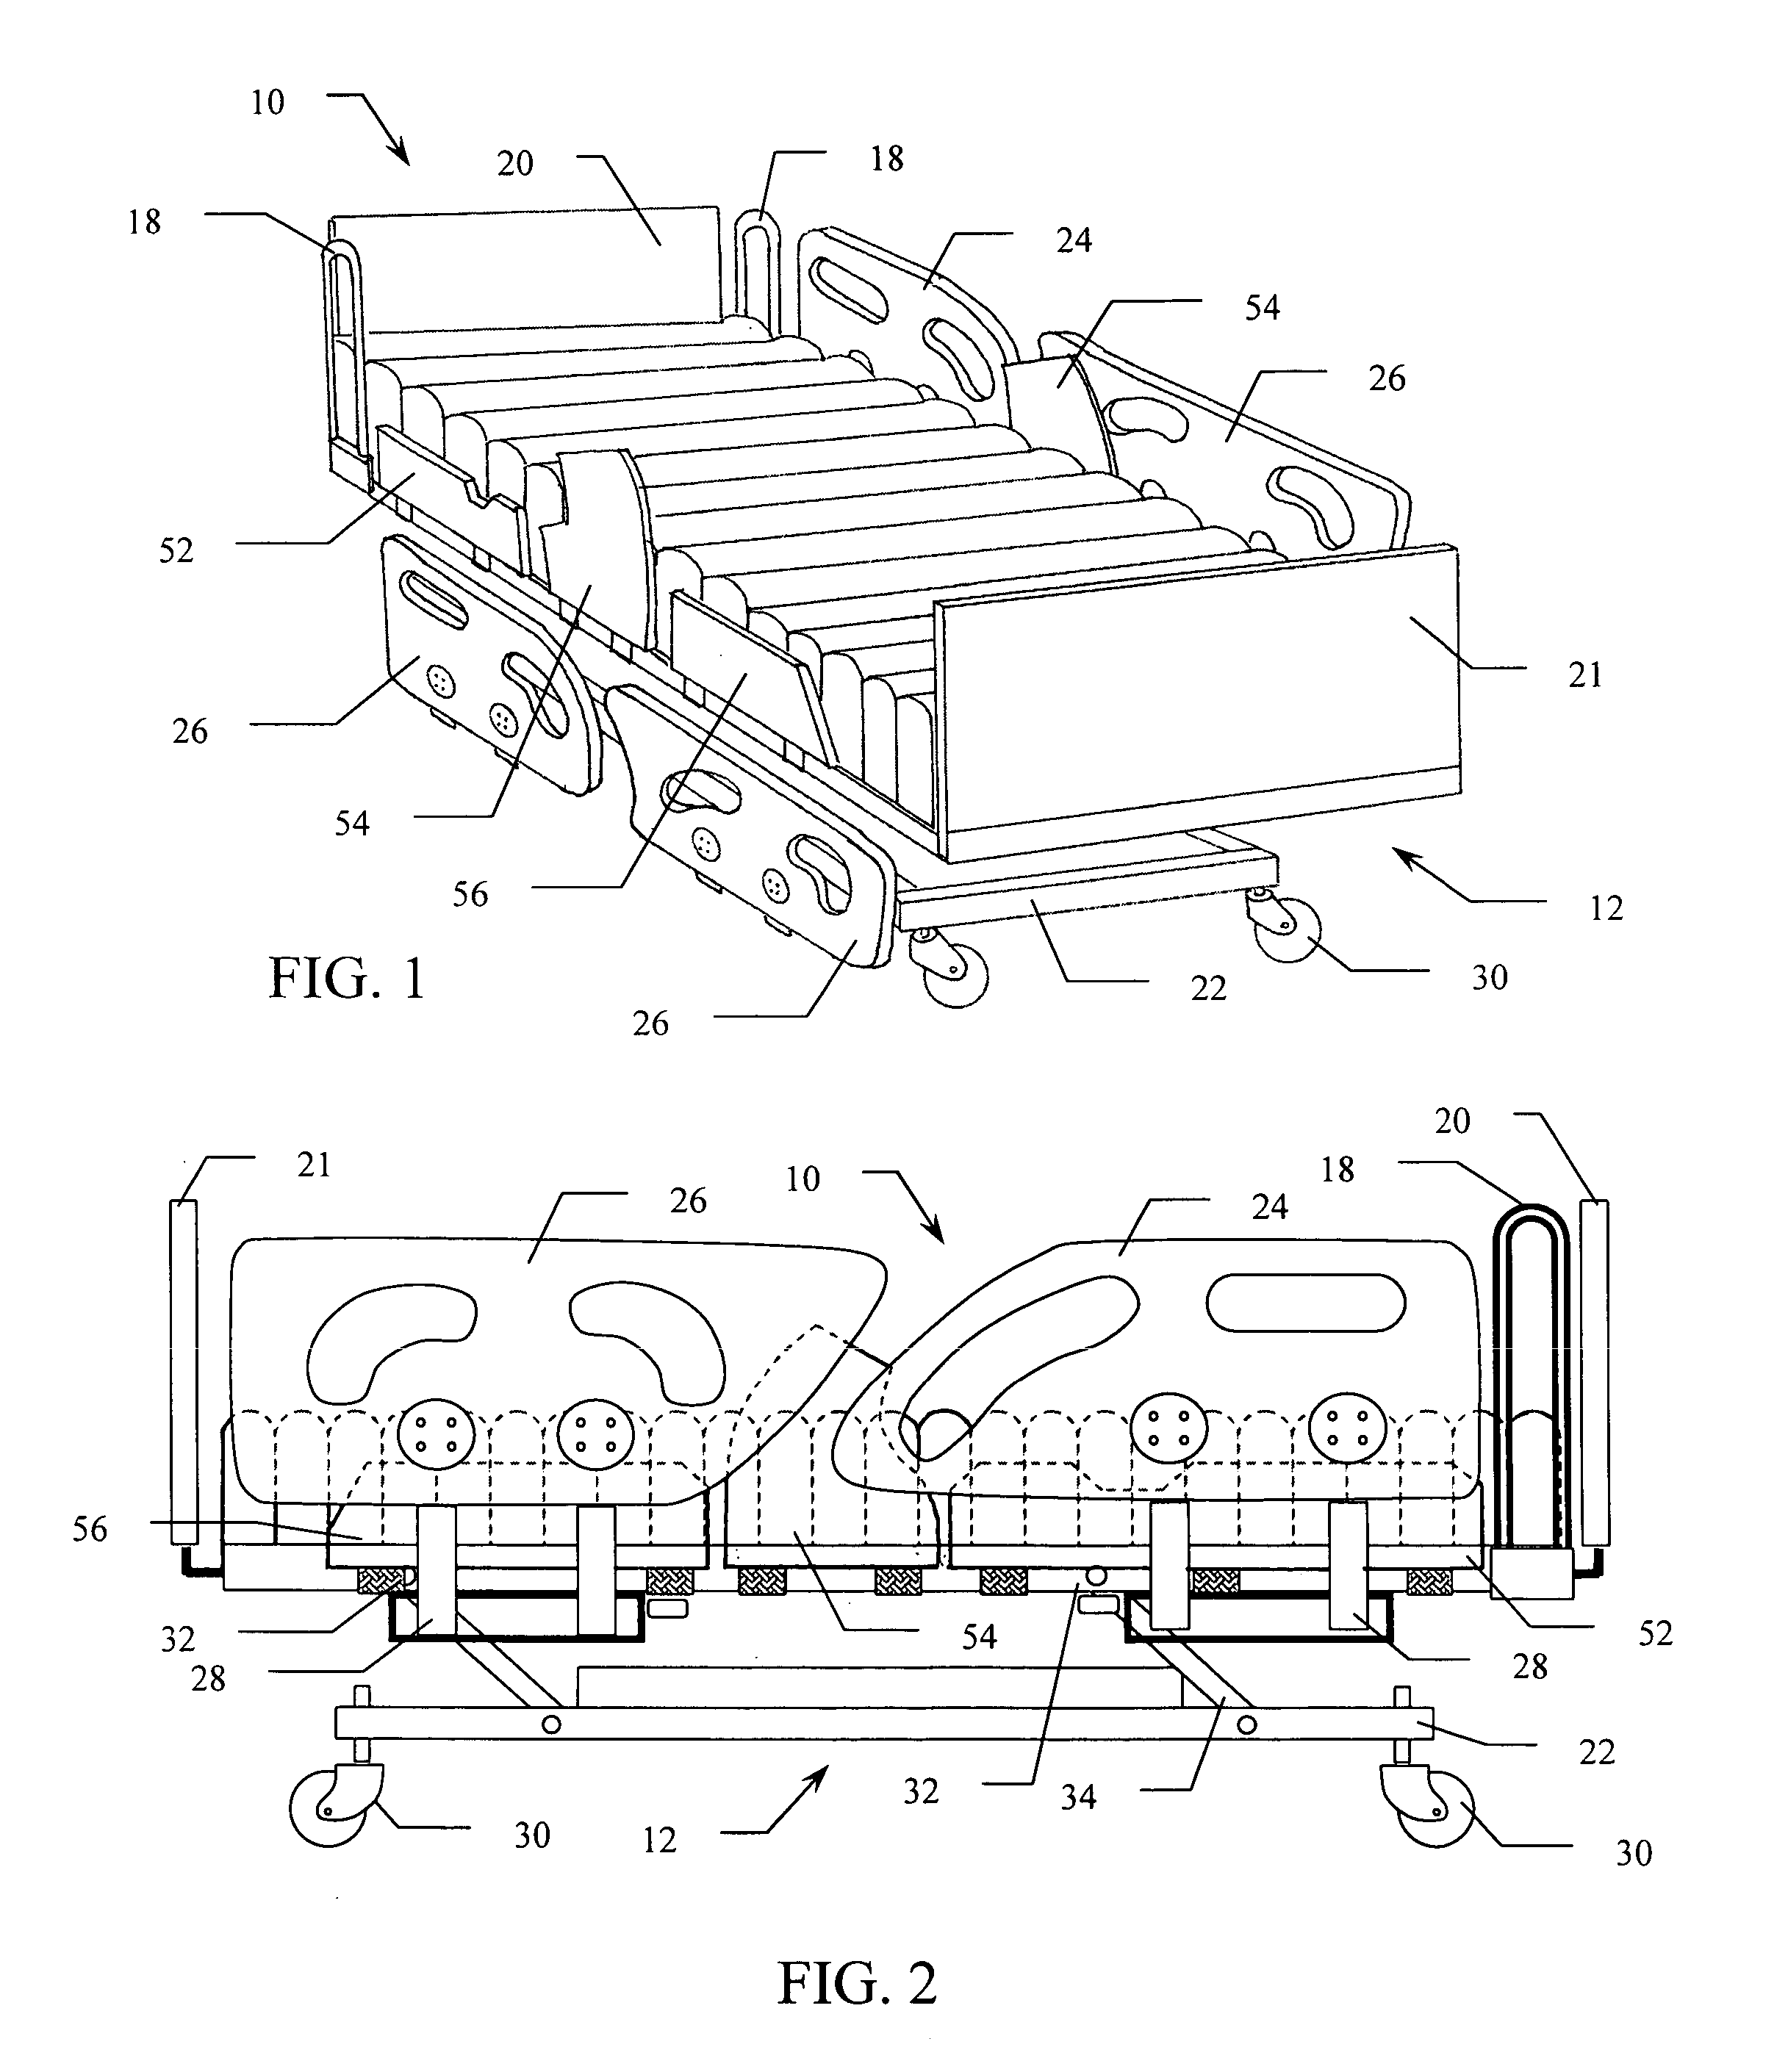 Side rail pad system for patient support apparatus